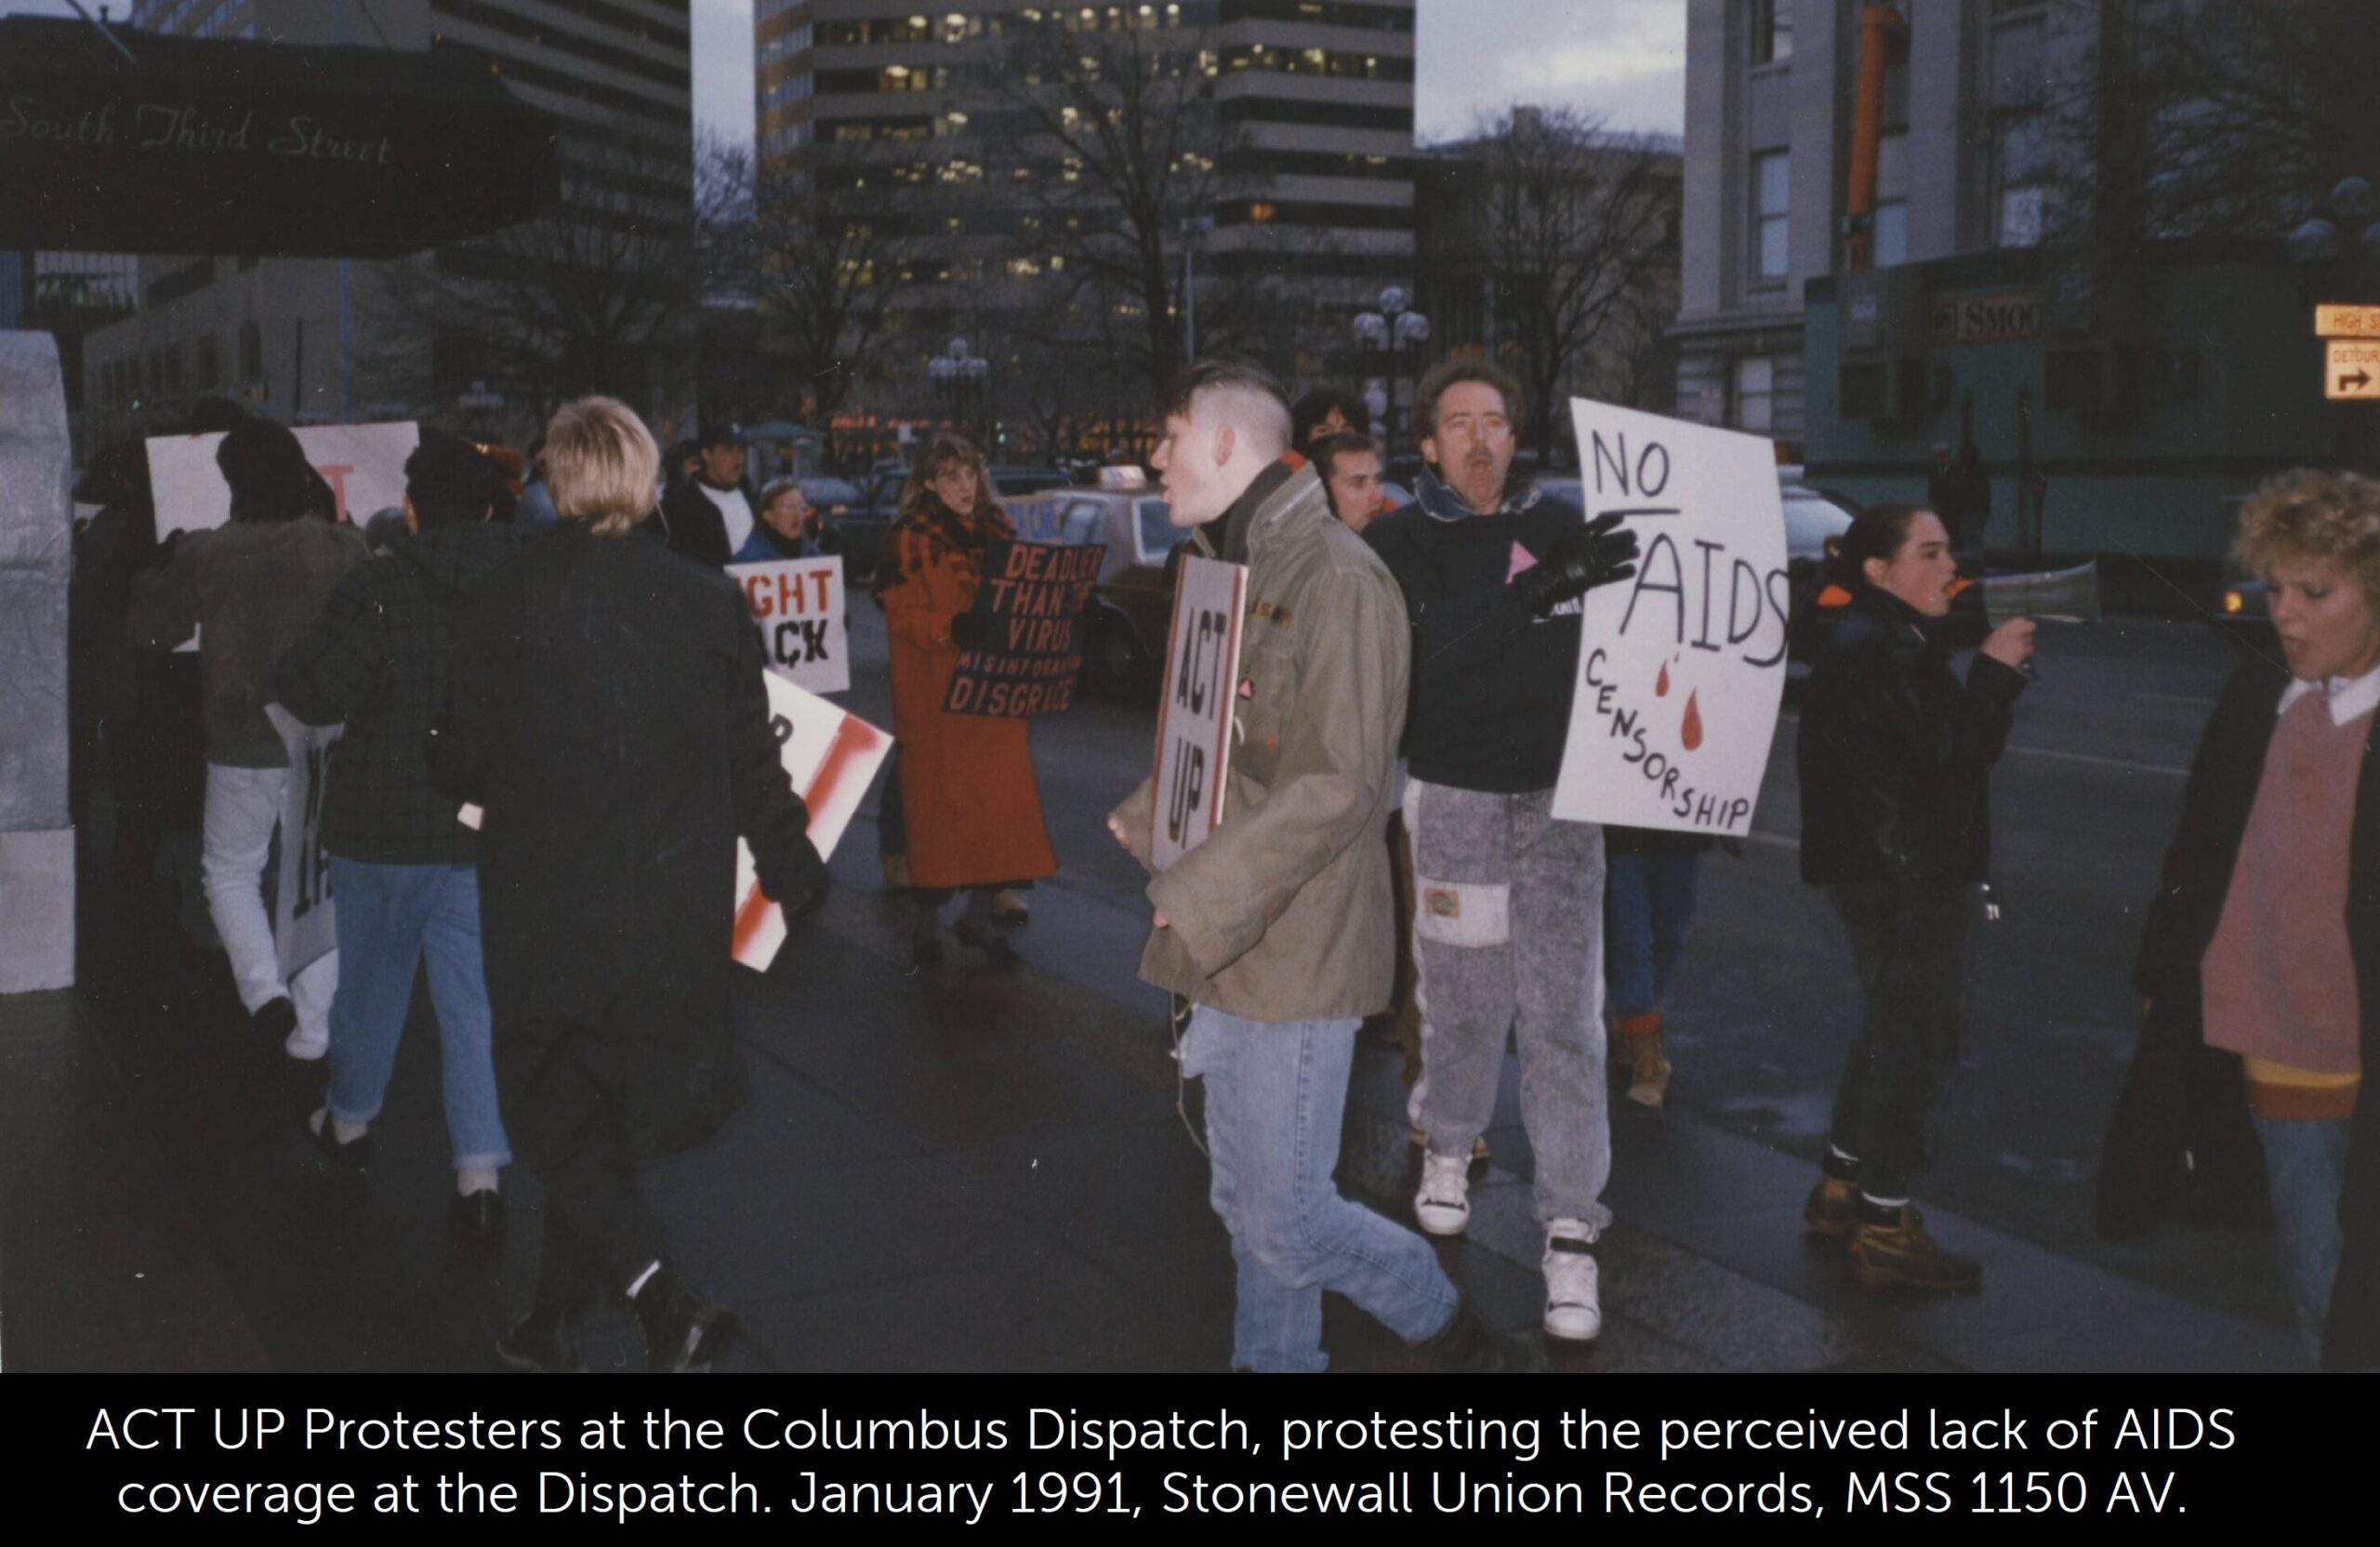 A photo of ACT UP protesters at The Columbus Dispatch in January 1991